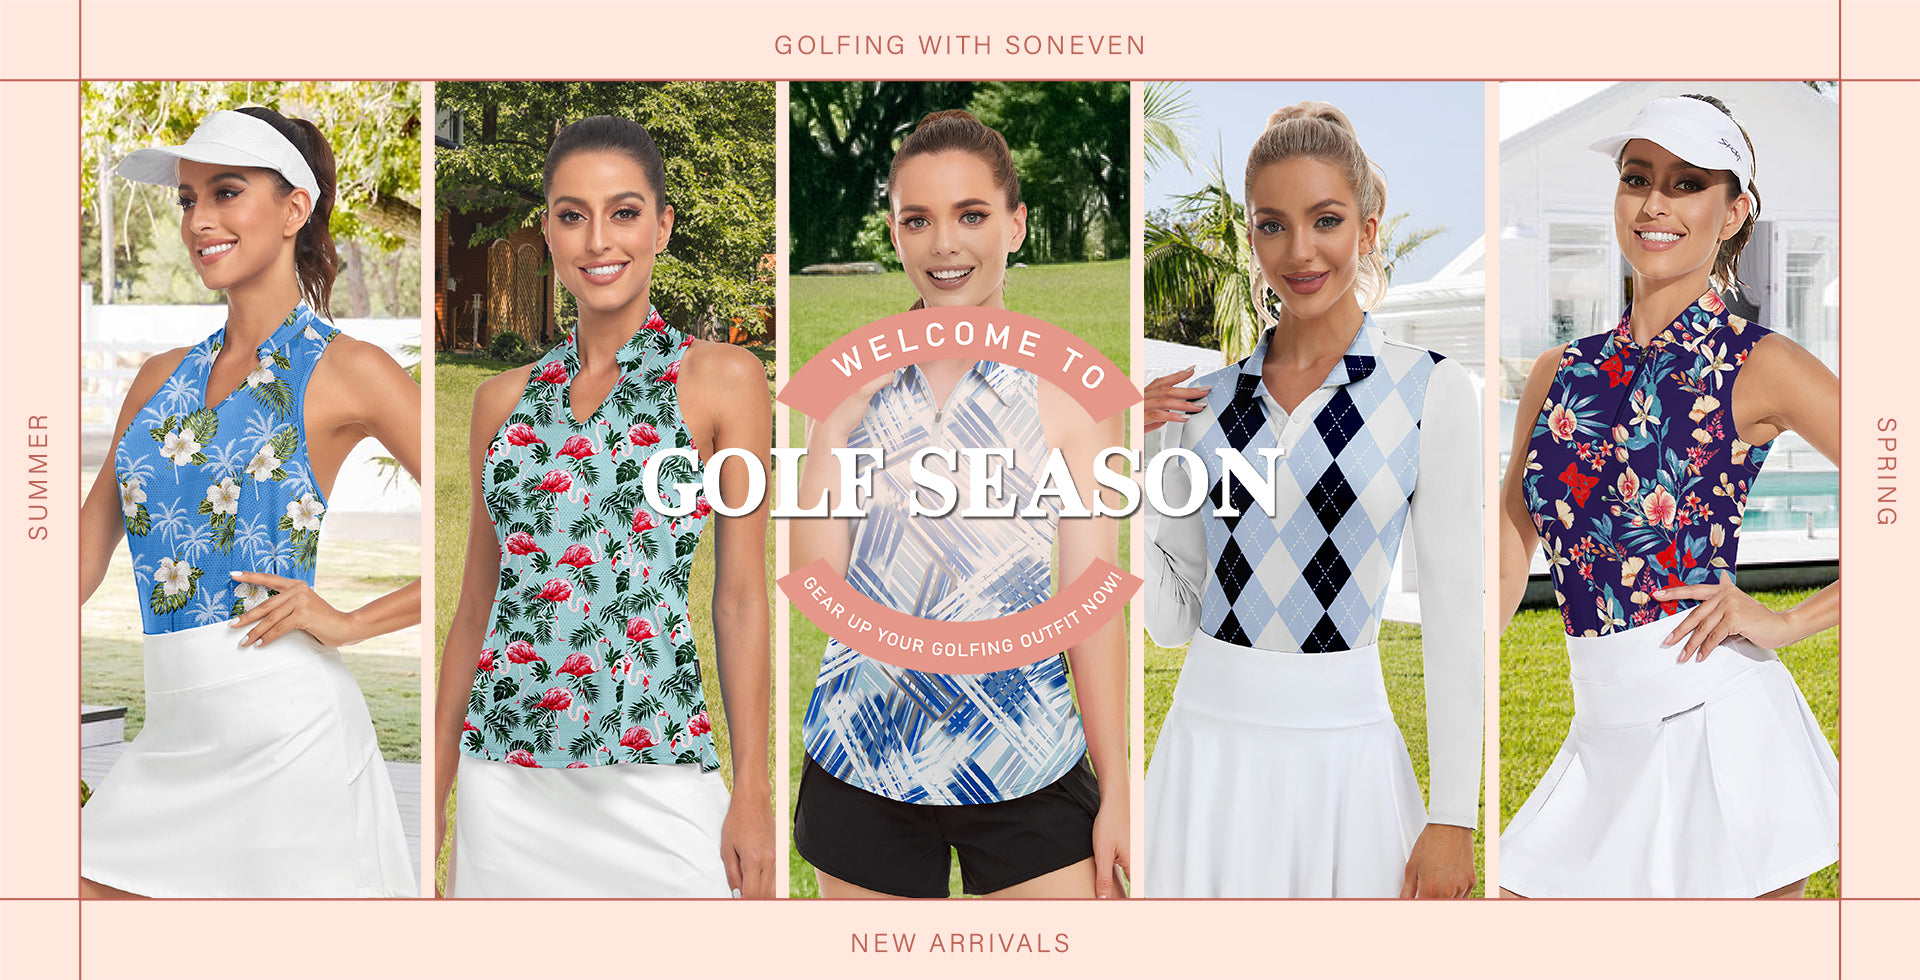 Gear up your golfing outfits